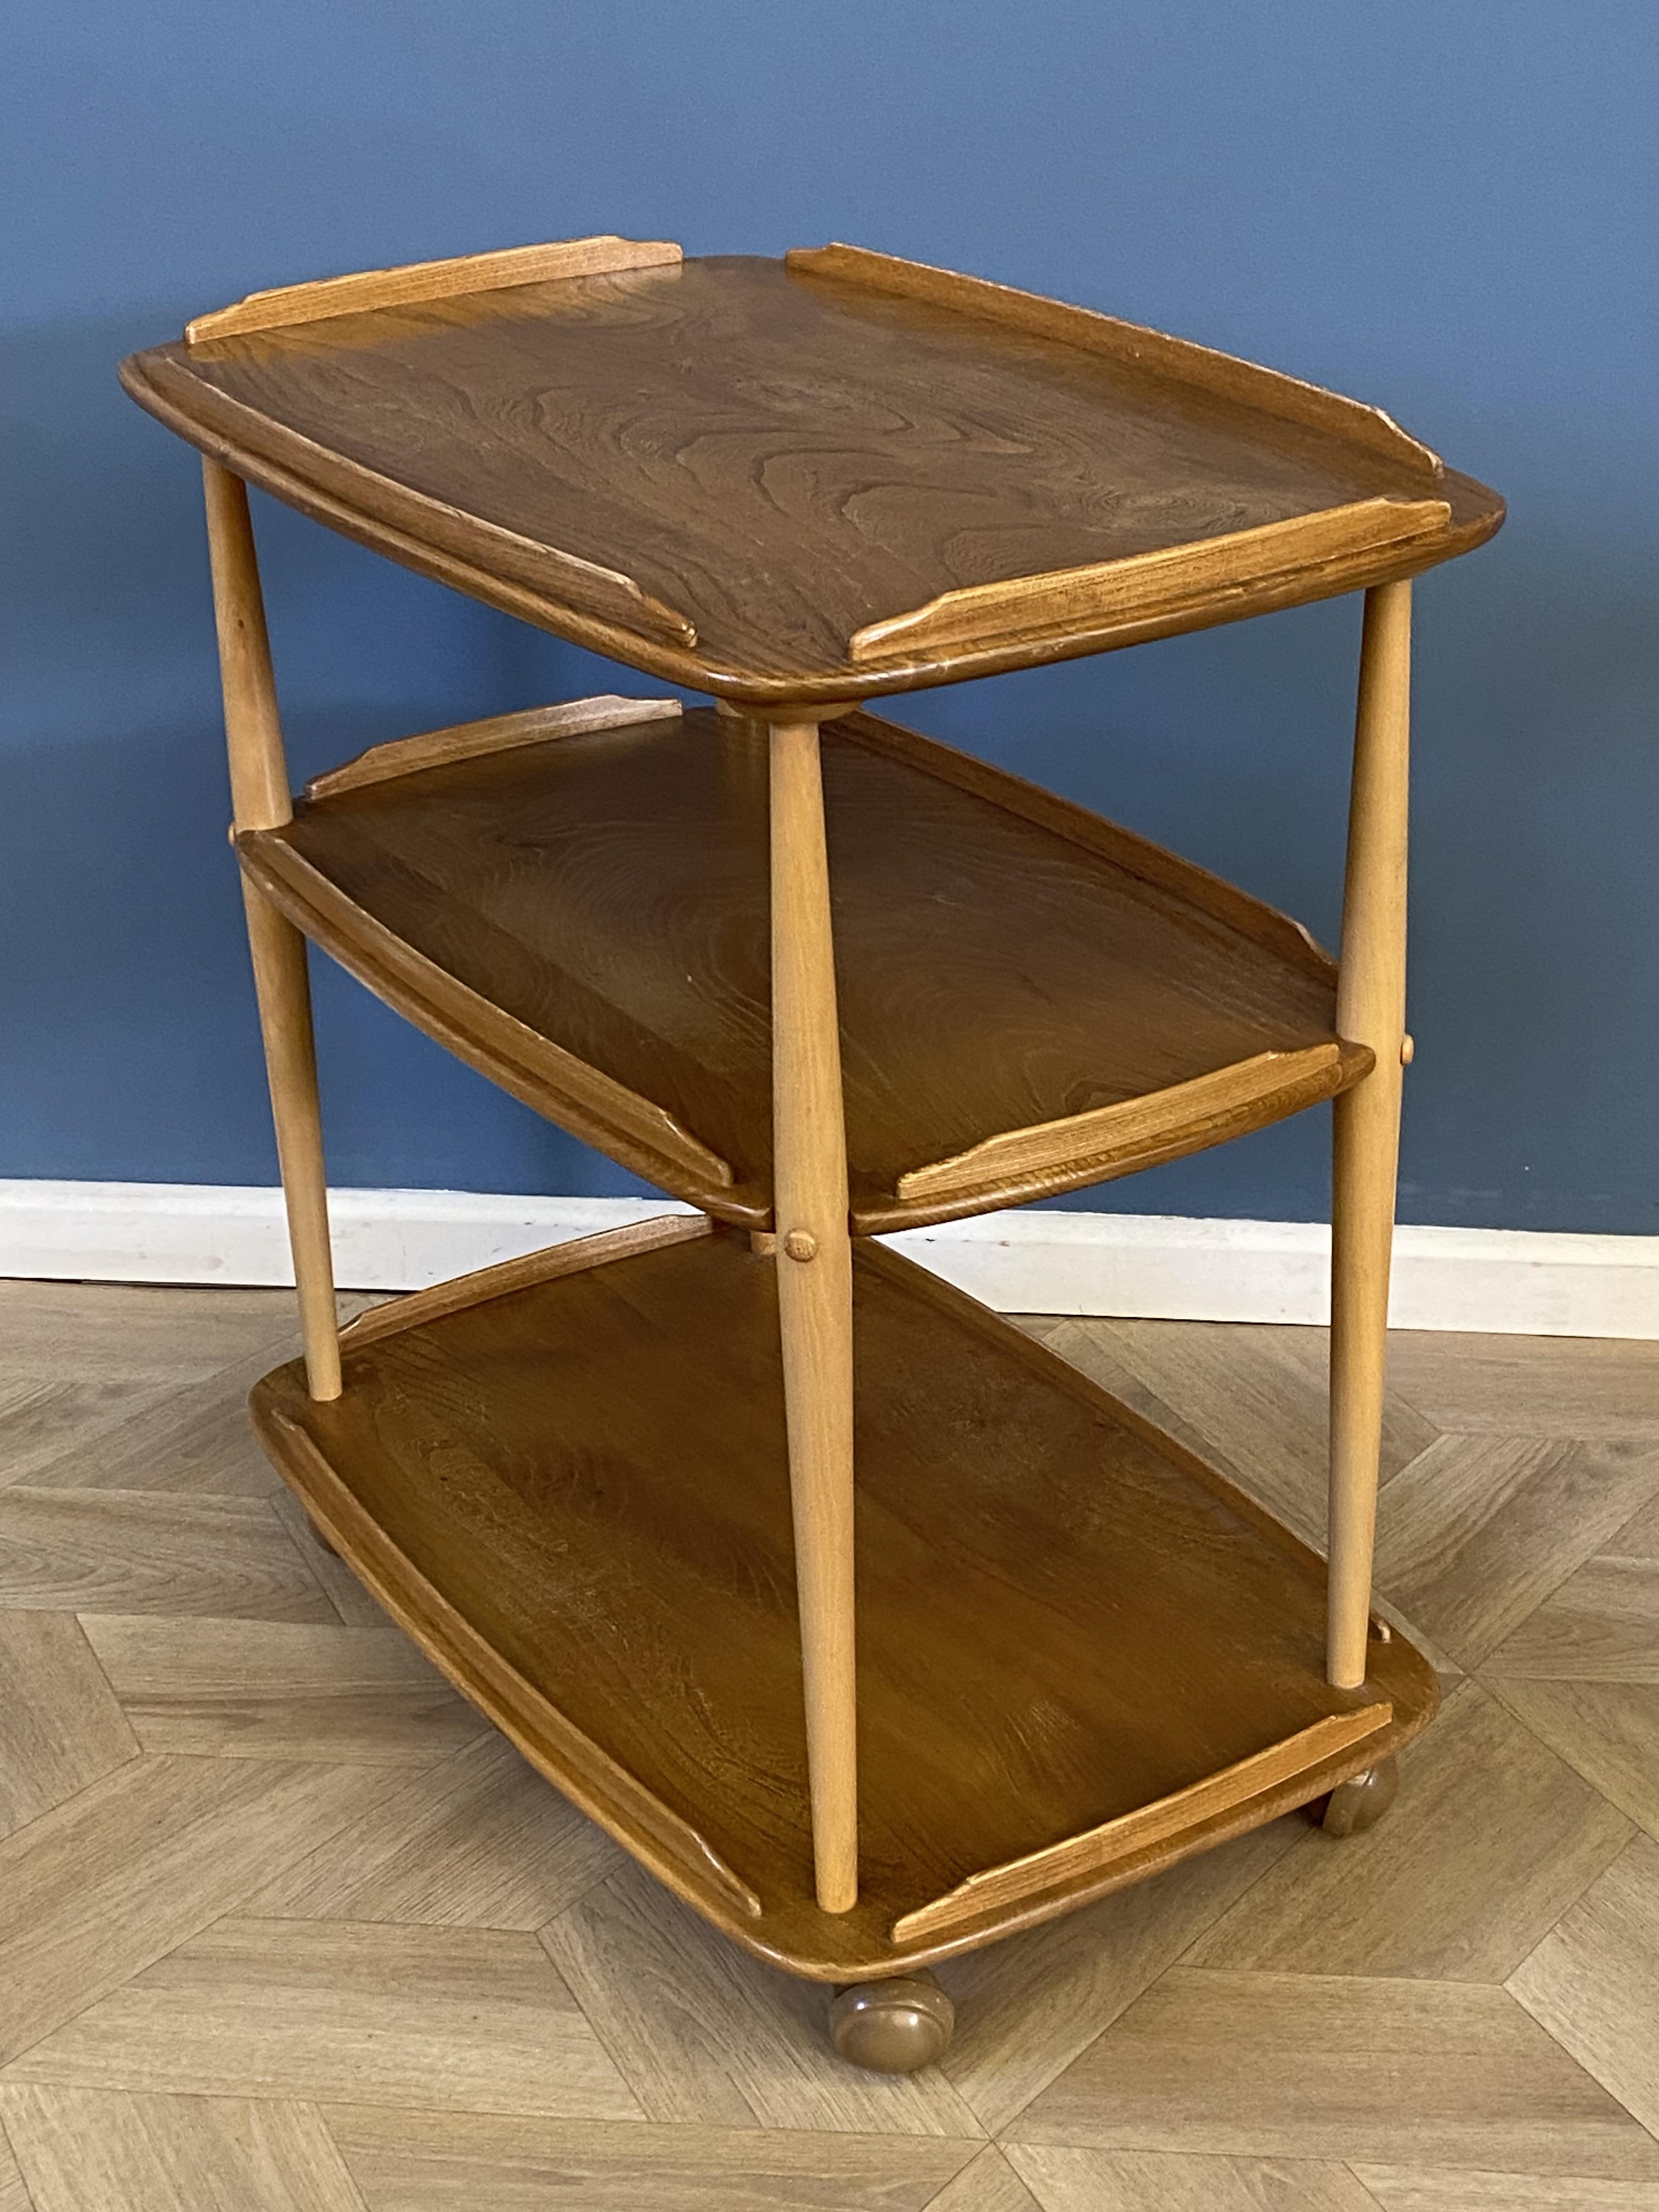 Ercol style three tier serving trolley - Image 3 of 5